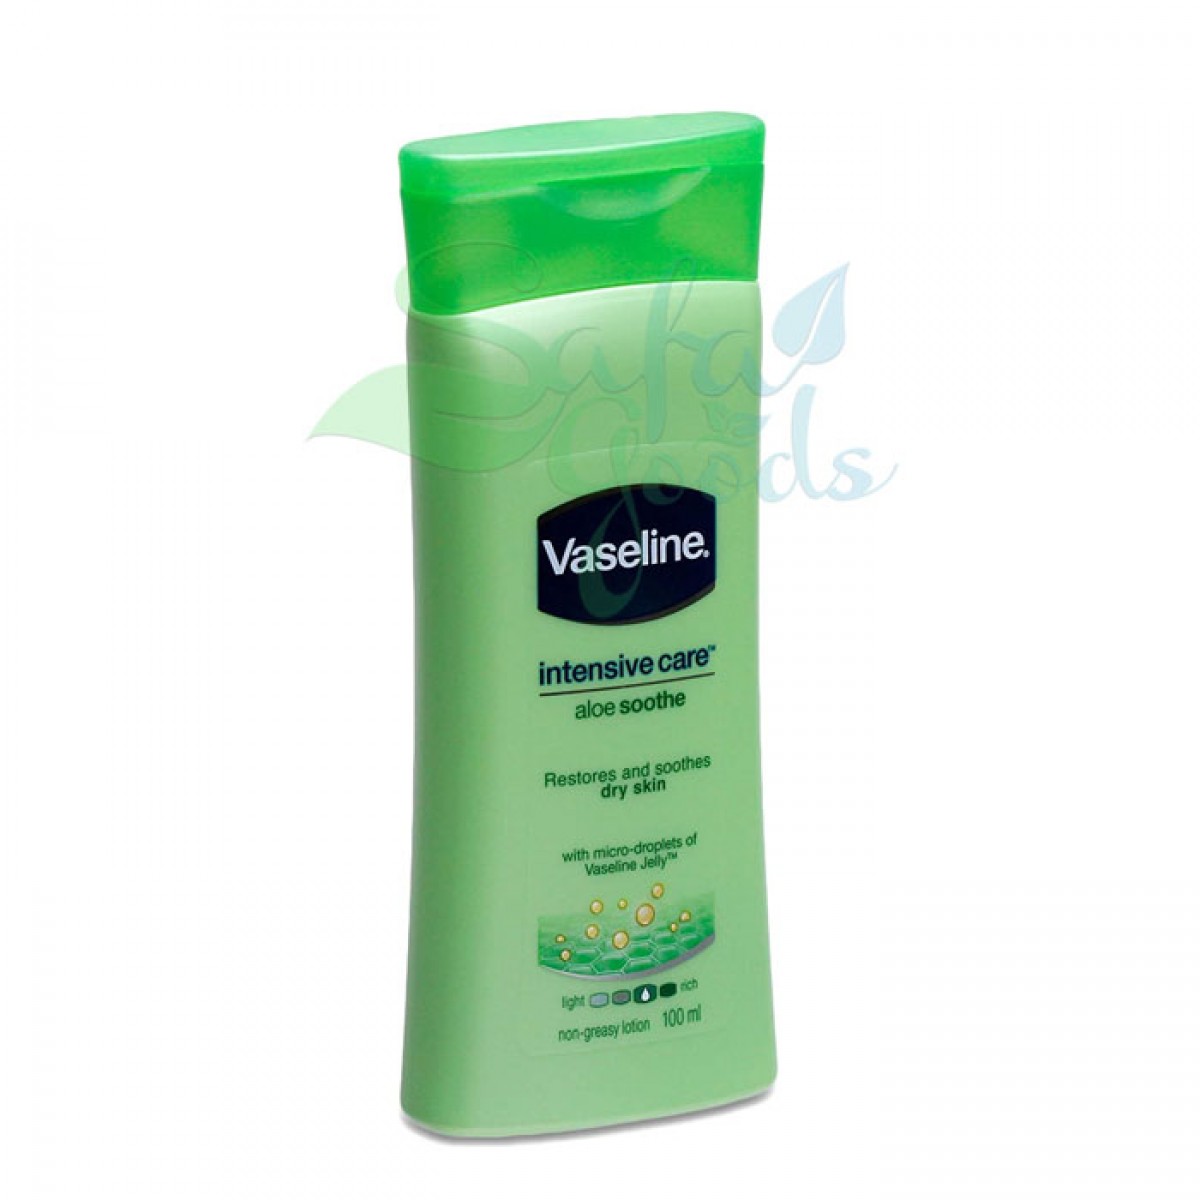 Vaseline Intensive Care Aloe Sooth Lotion 100mL